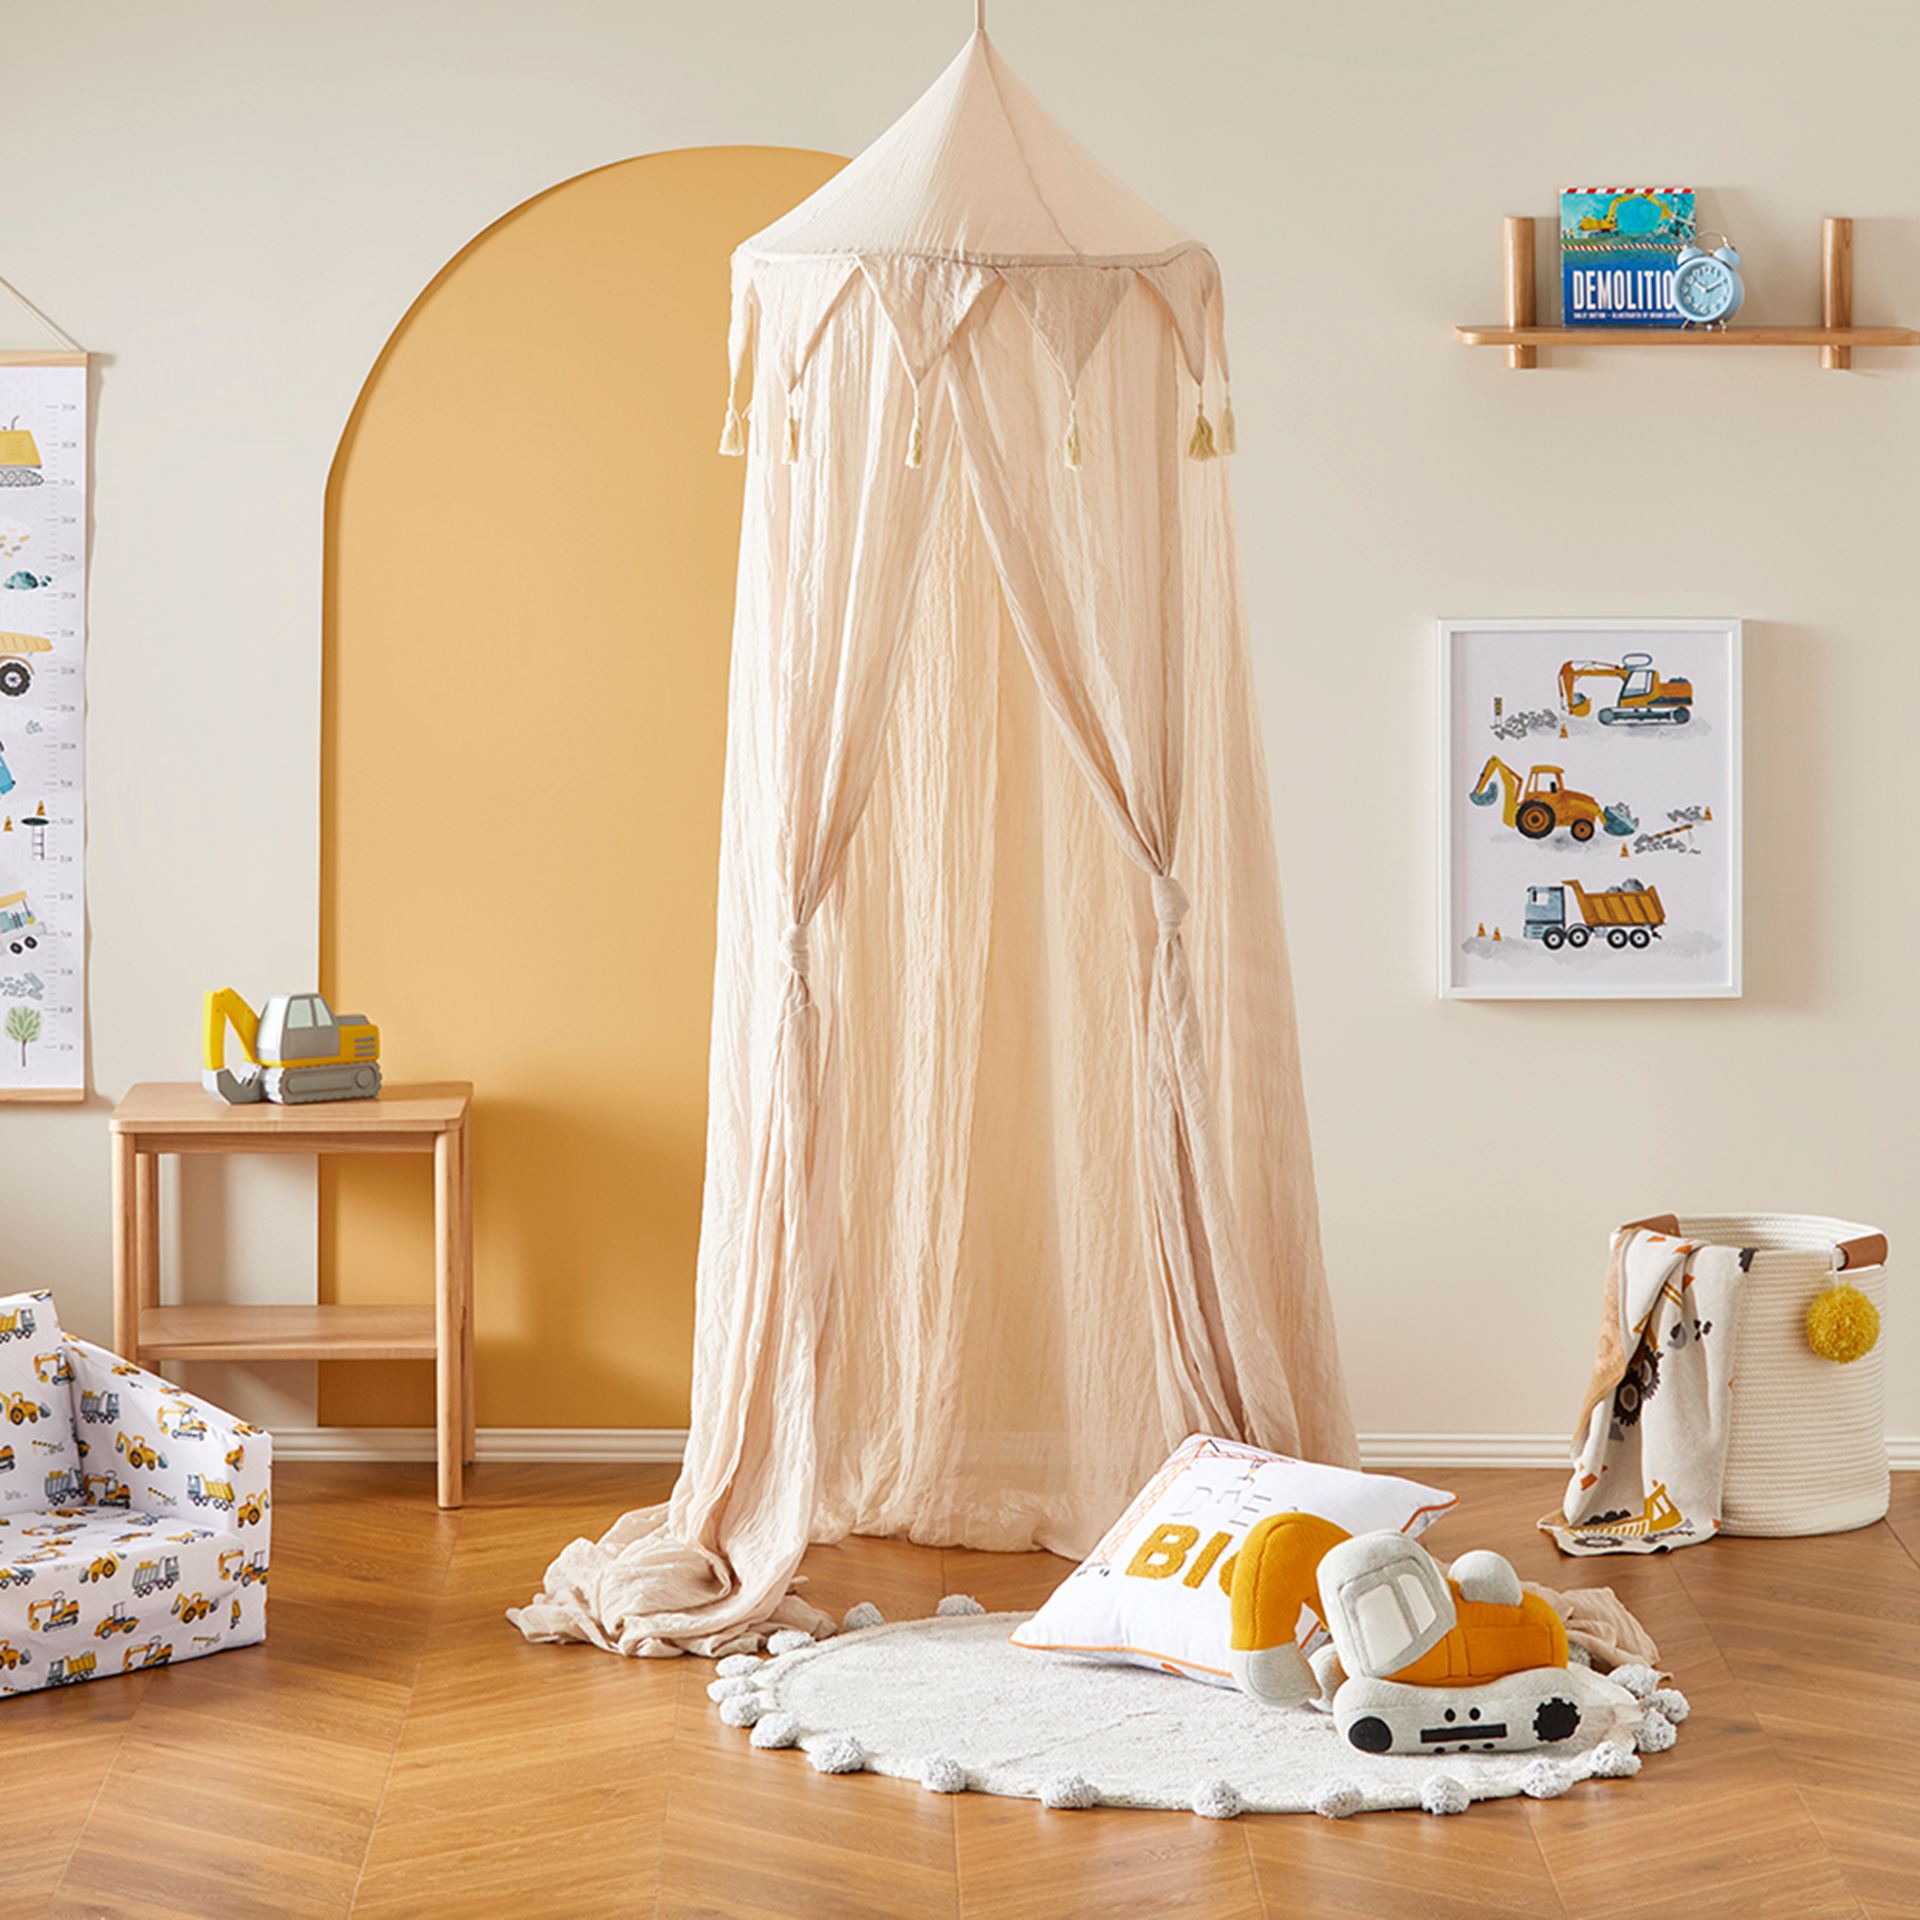 https://www.adairs.com.au/globalassets/13.-ecommerce/03.-product-images/2023_images/kids/kids-teepees--canopies/45629_natural_01.jpg?width=1920&mode=crop&heightratio=1&quality=80